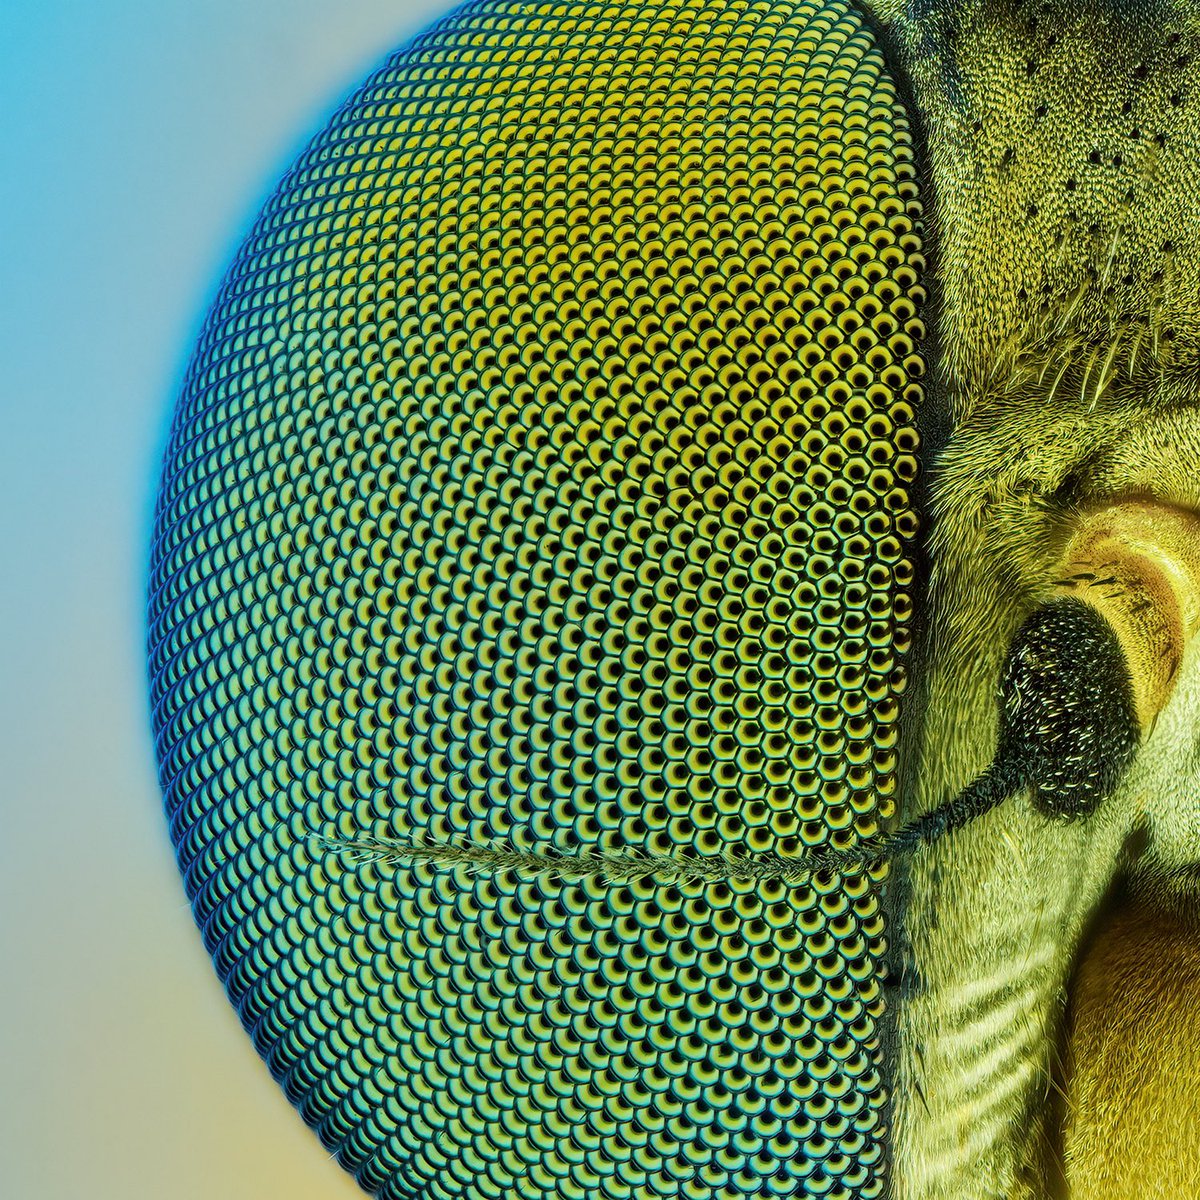 Snipe fly, Rhagionidae. Blue background, yellow proboscis in the blur and green eyes. What a combination 🥰 Photographed with the new @laowa_lens Aurogon at 10:1. There are a few details about this picture on Laowa’s YouTube channel. For the masterclass series I made a video that